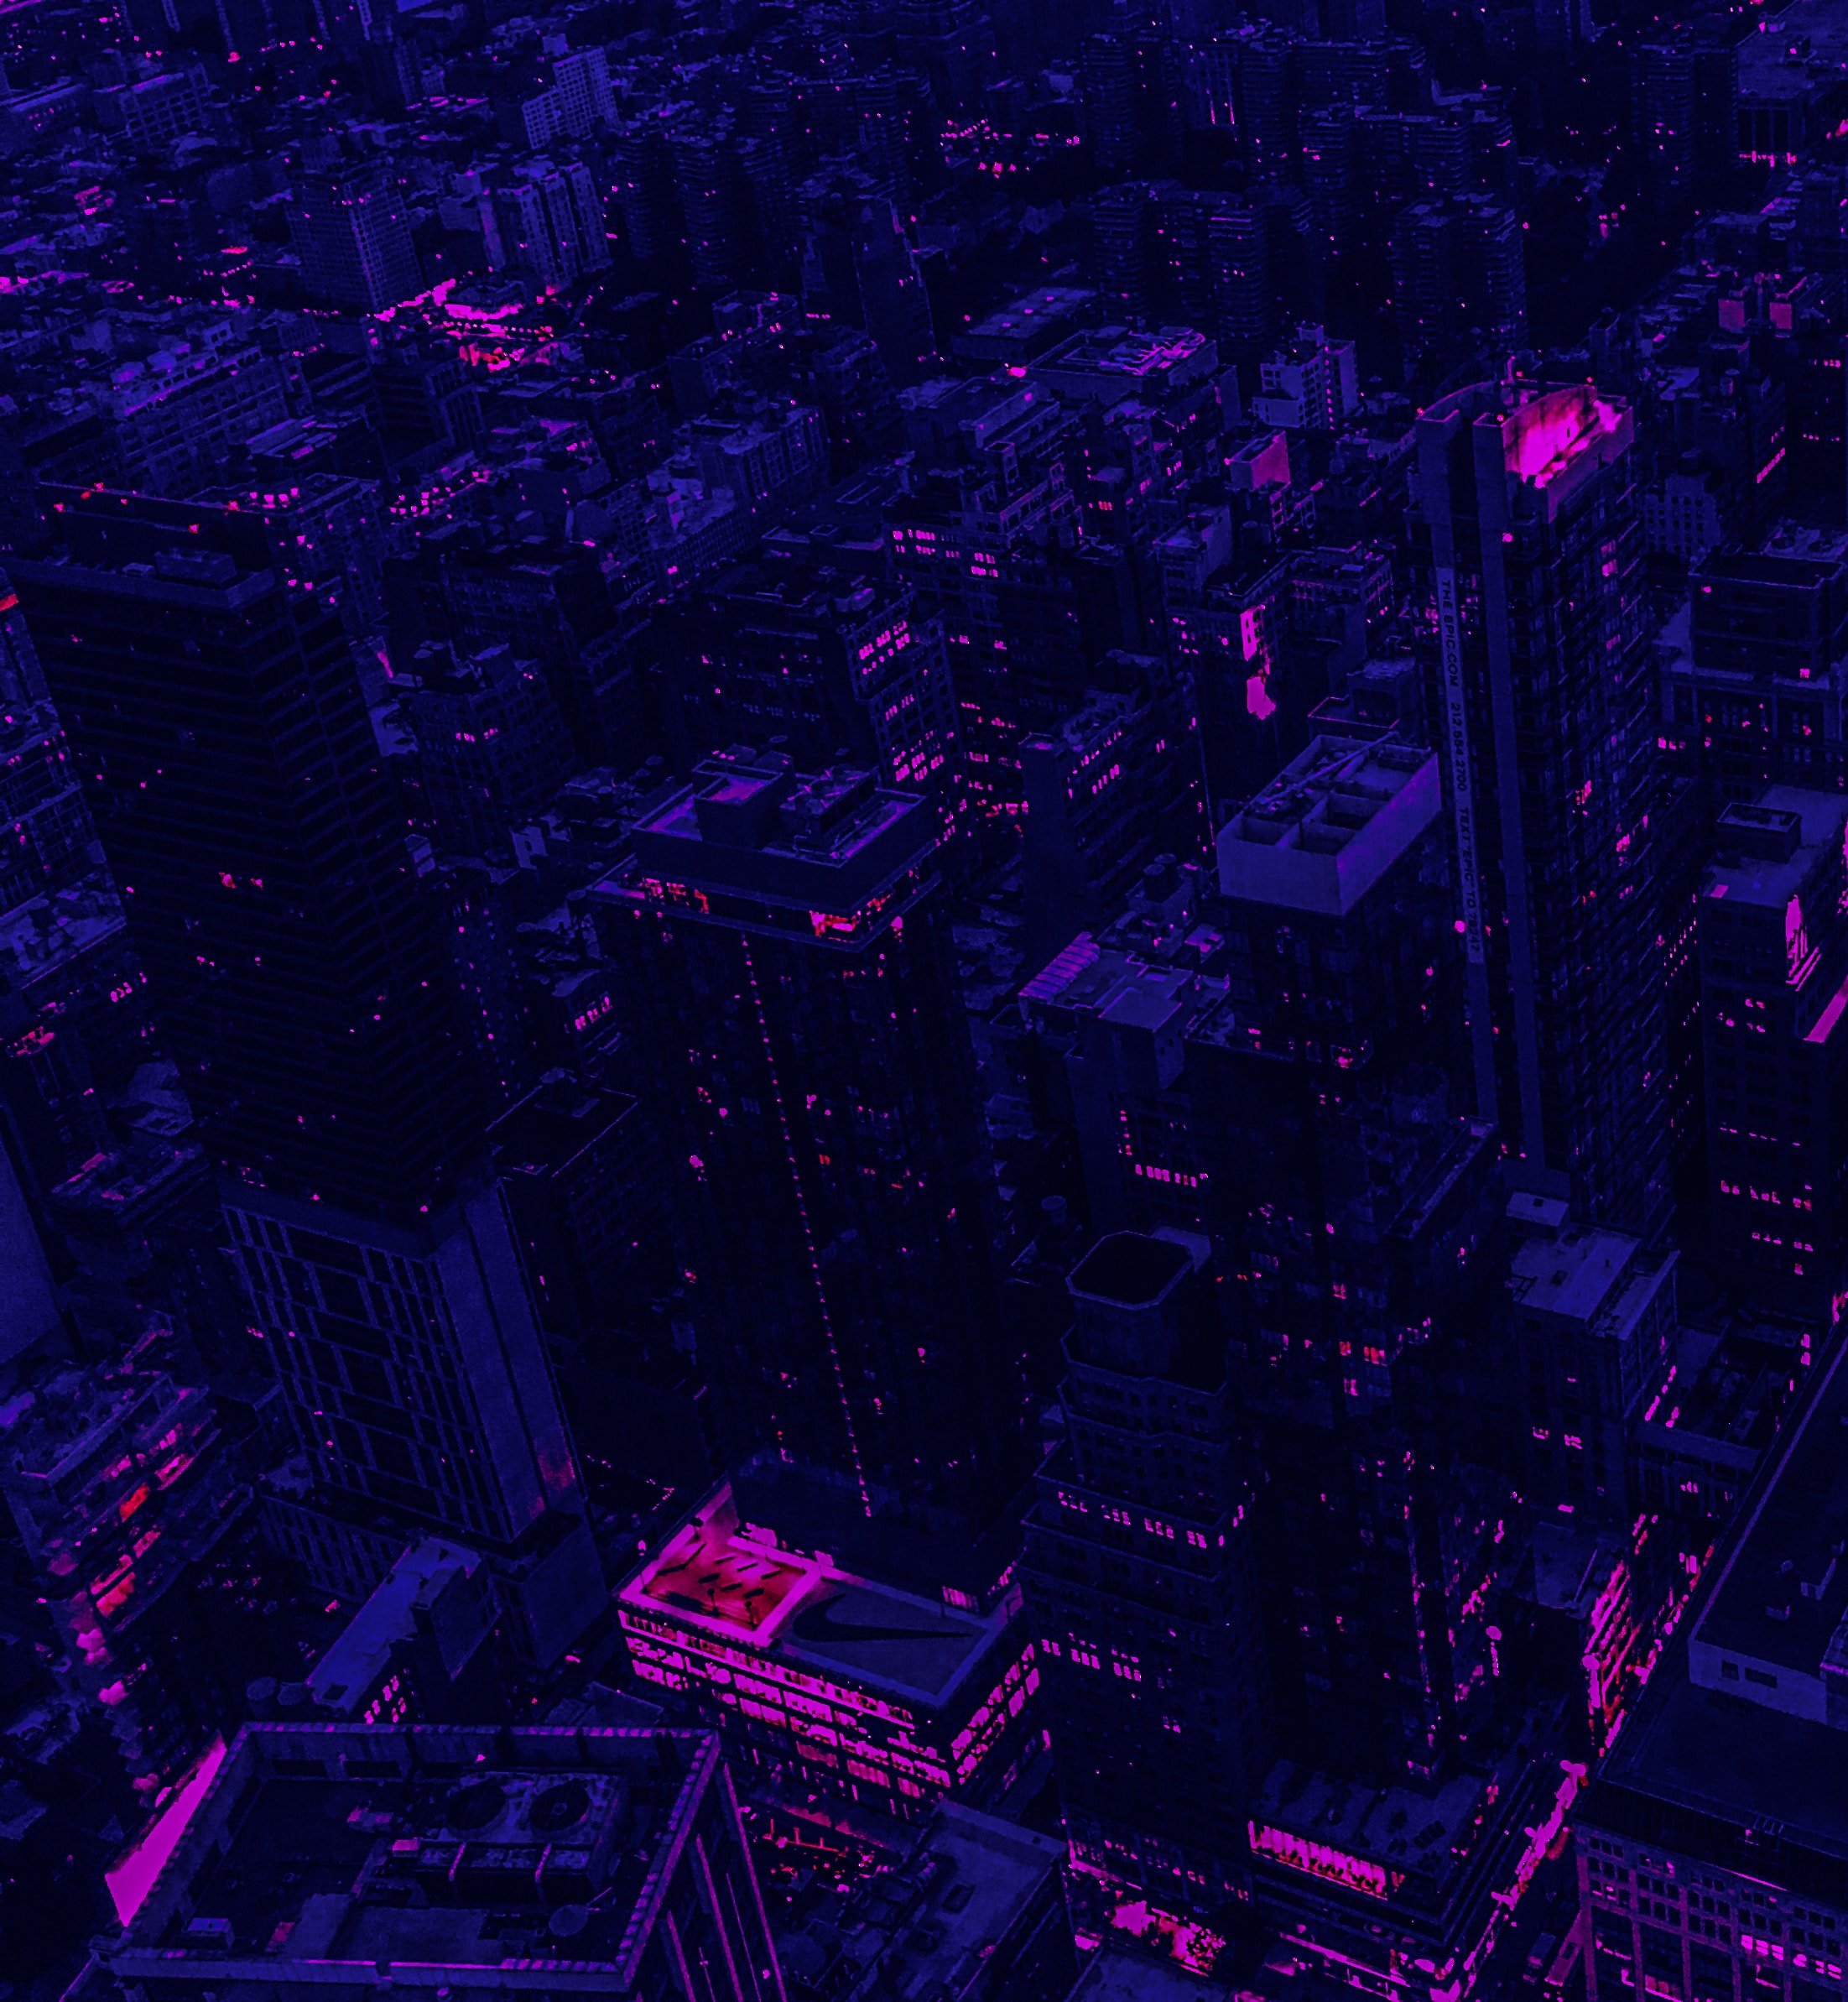 purple, violet, dark, view from above, city, building UHD